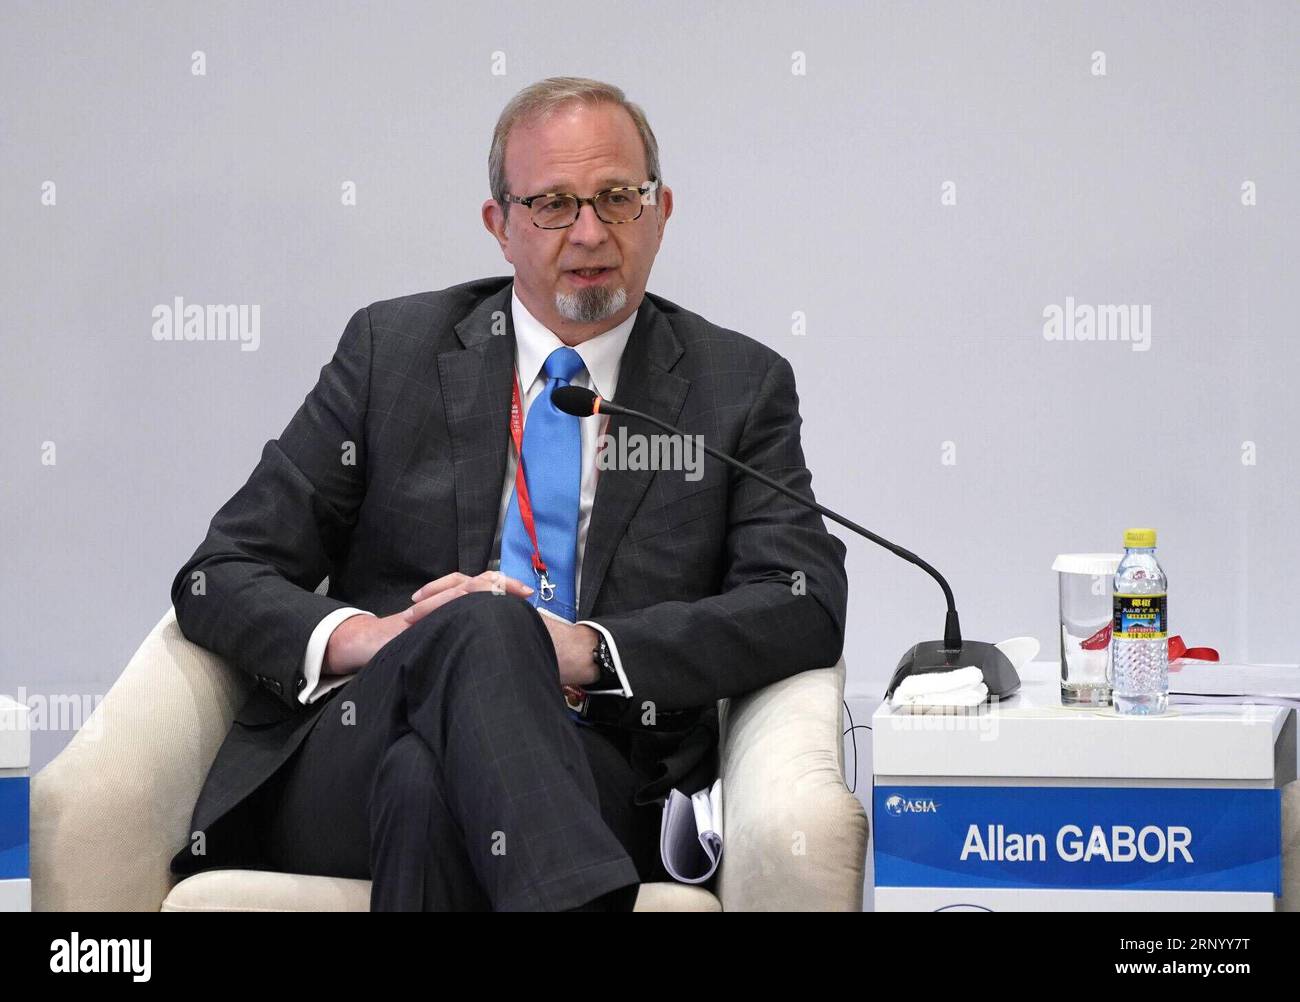 (180409) -- BOAO, April 9, 2018 -- E. Allan Gabor, managing director and country speaker of Merck Holding (China) Co. Ltd and general manager of Merck Performance Materials in China, speaks at the session of The Future of Production during the Boao Forum for Asia Annual Conference 2018 in Boao, south China s Hainan Province, April 9, 2018. ) (wyl) CHINA-BOAO-BFA-FUTURE PRODUCTION (CN) XingxGuangli PUBLICATIONxNOTxINxCHN Stock Photo